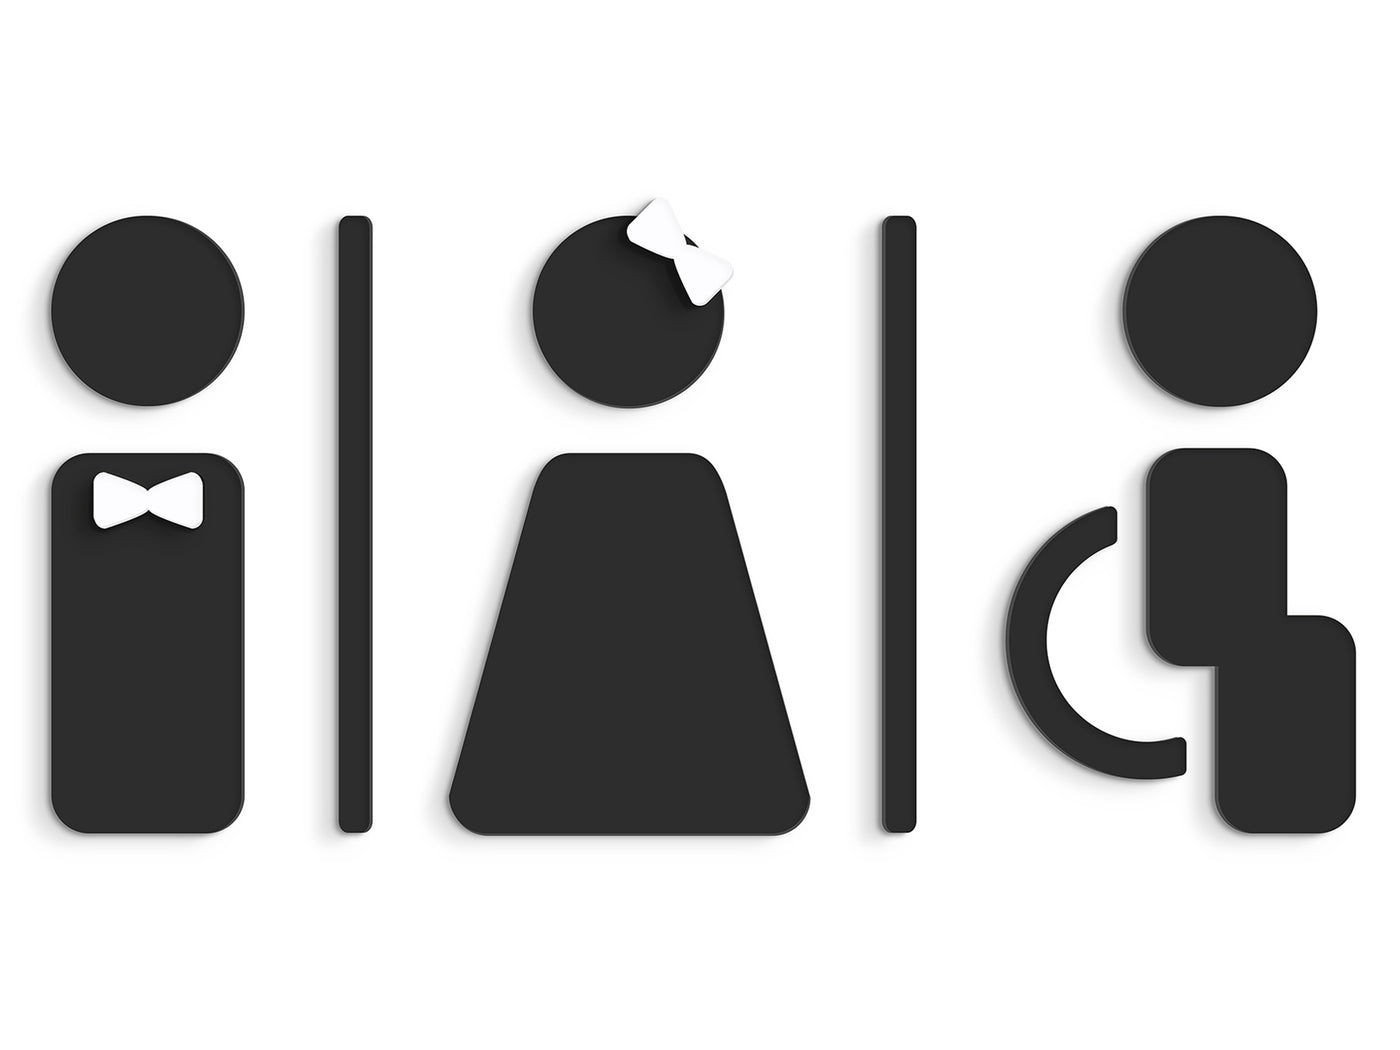 Styled knot, Set 3x - Embossed Adhesive Symbols, Signage for Toilets -  Man, Woman, Disabled restroom